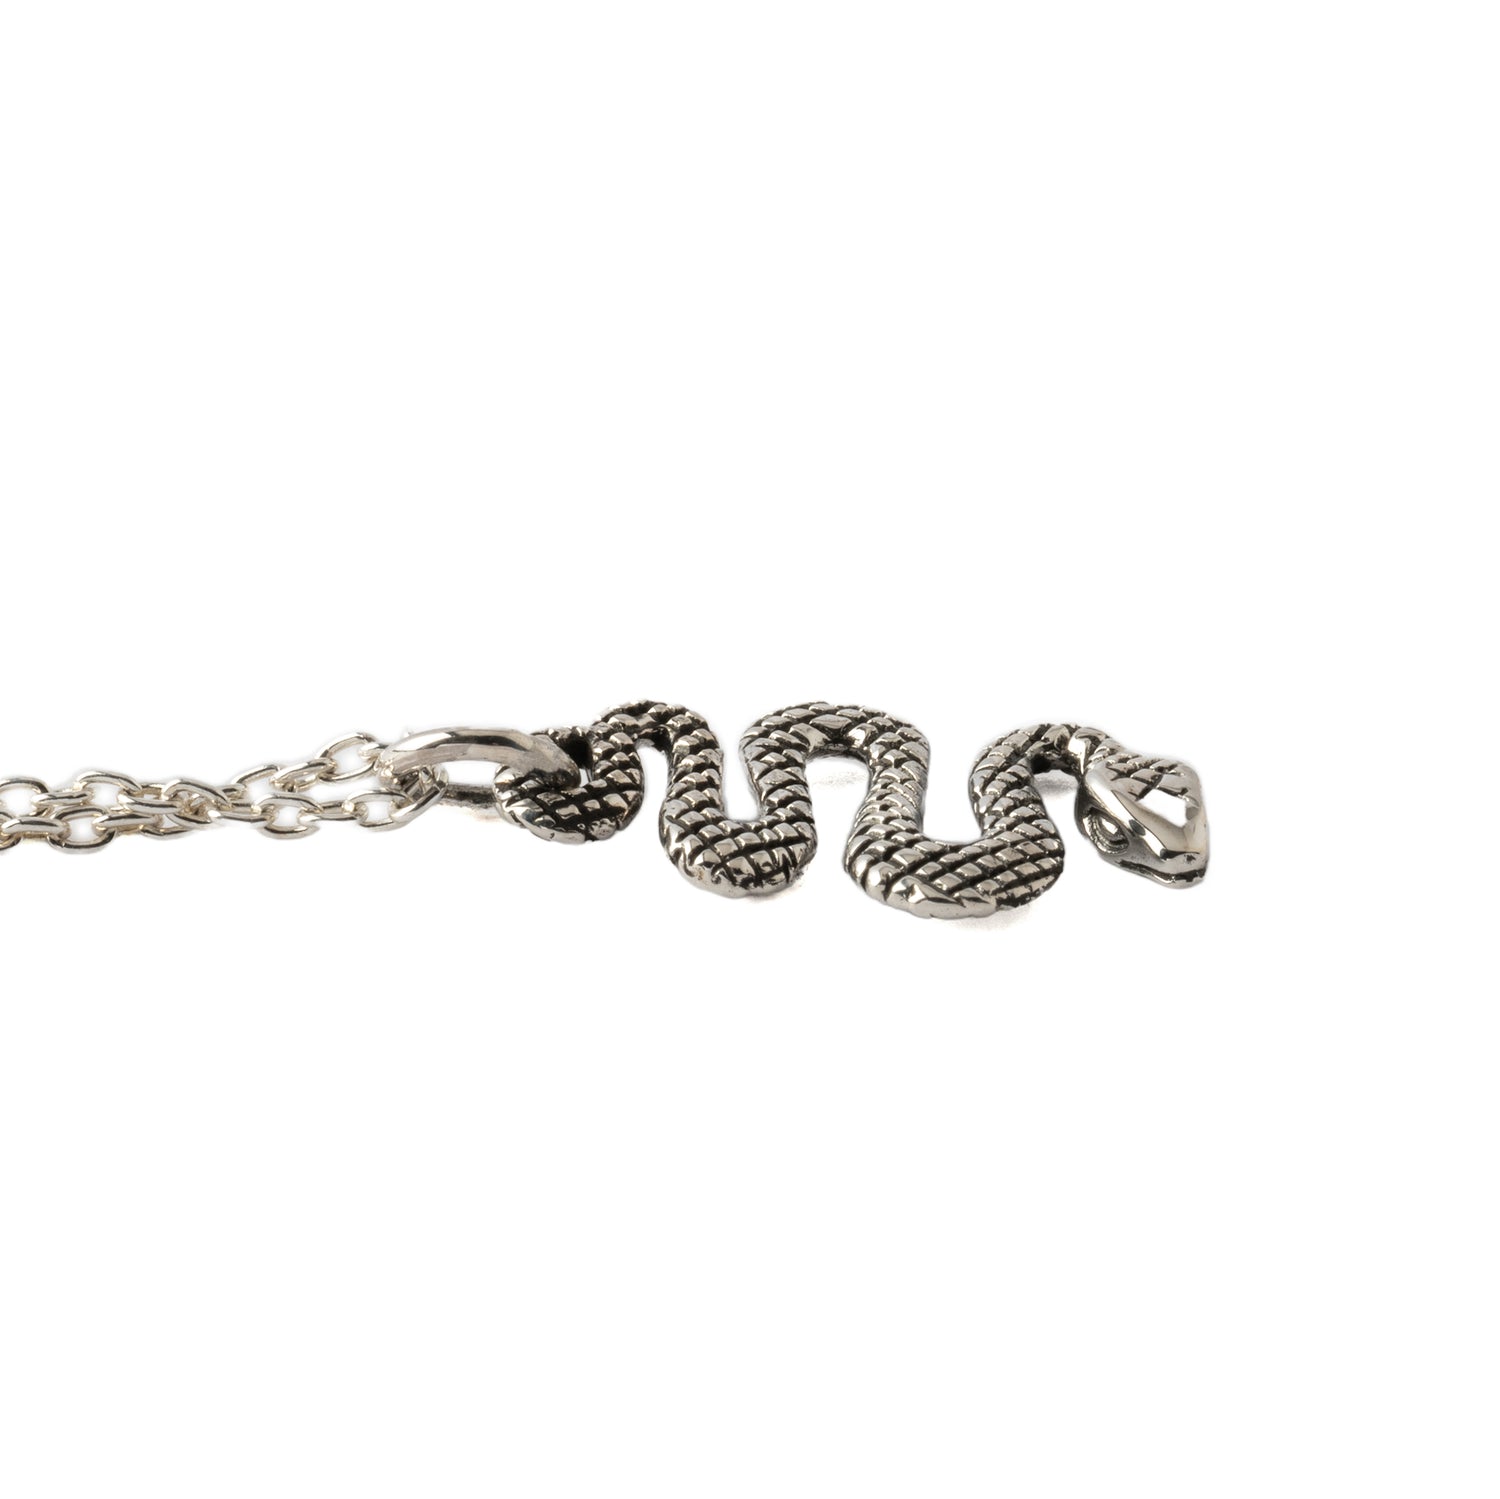 Tiny Snake Charm side view